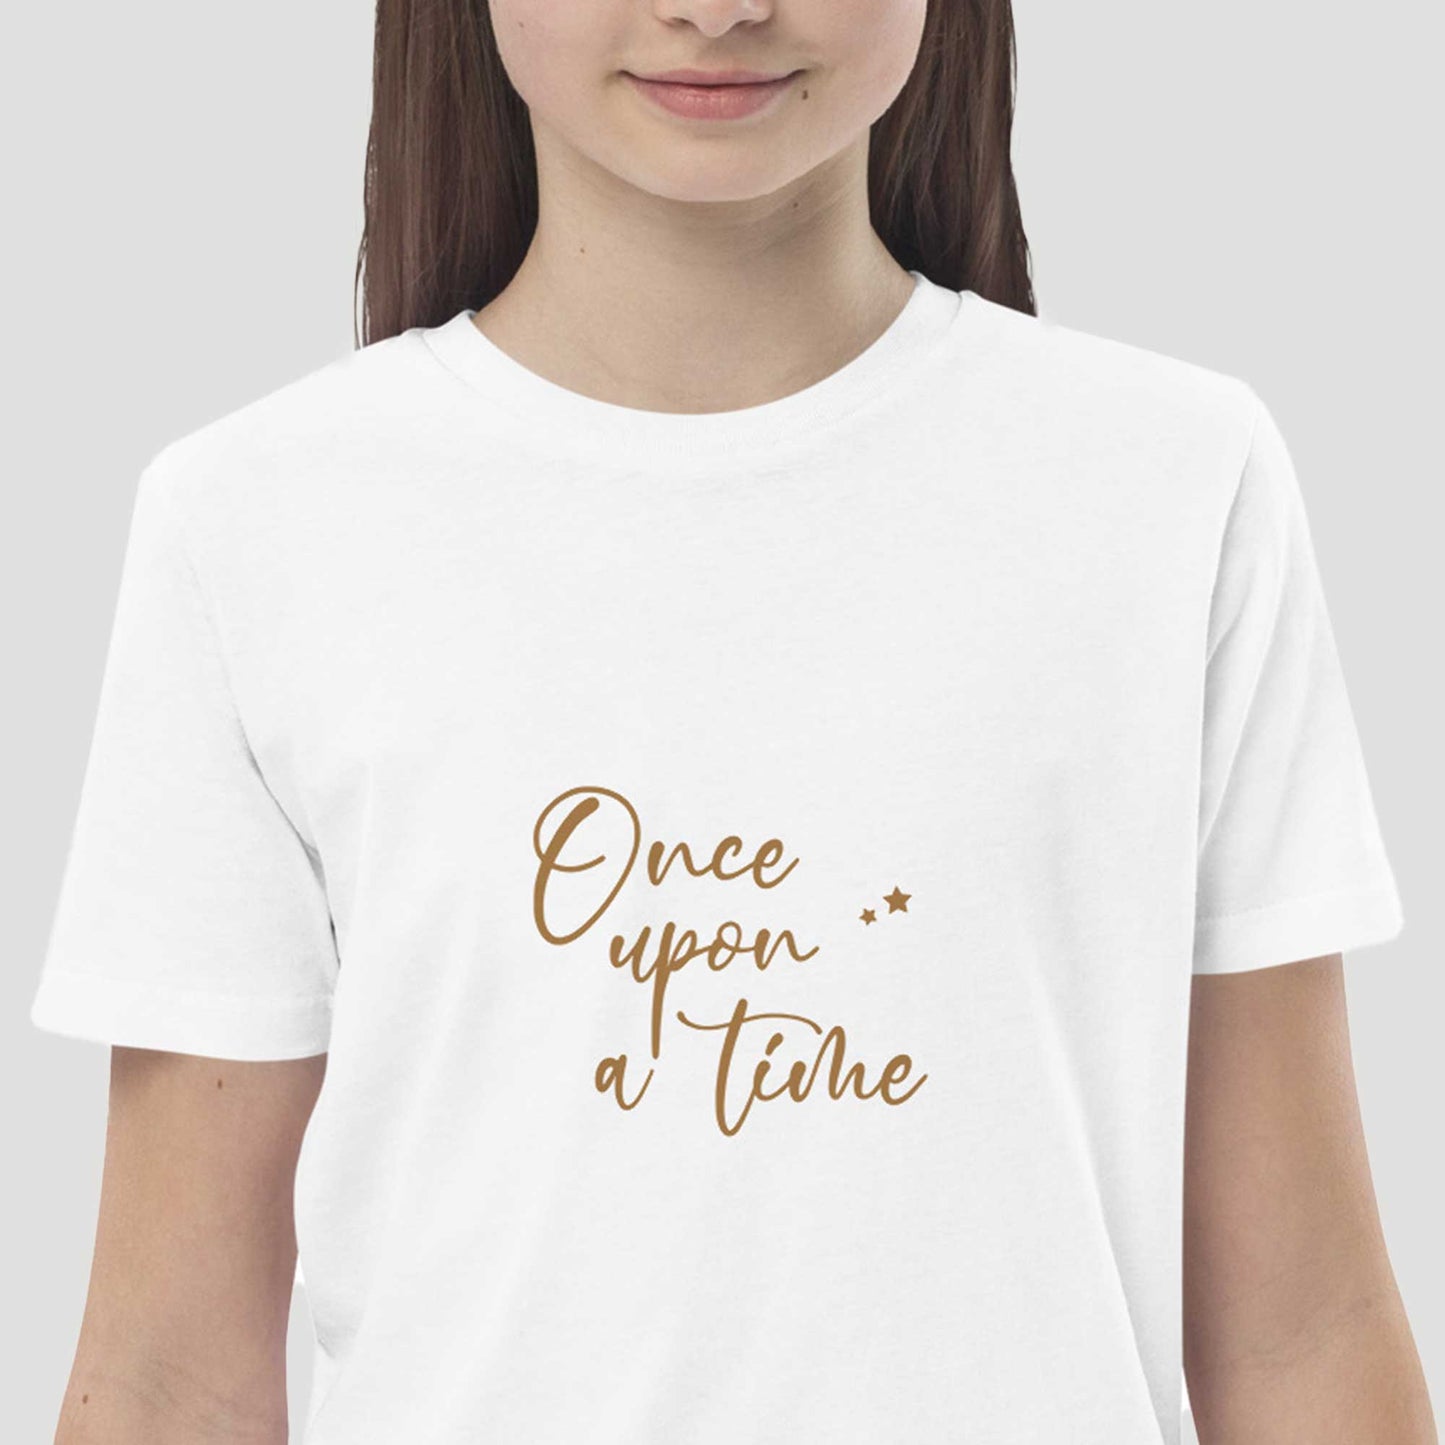 Close-up view of "Once upon a time" kids white organic tshirt